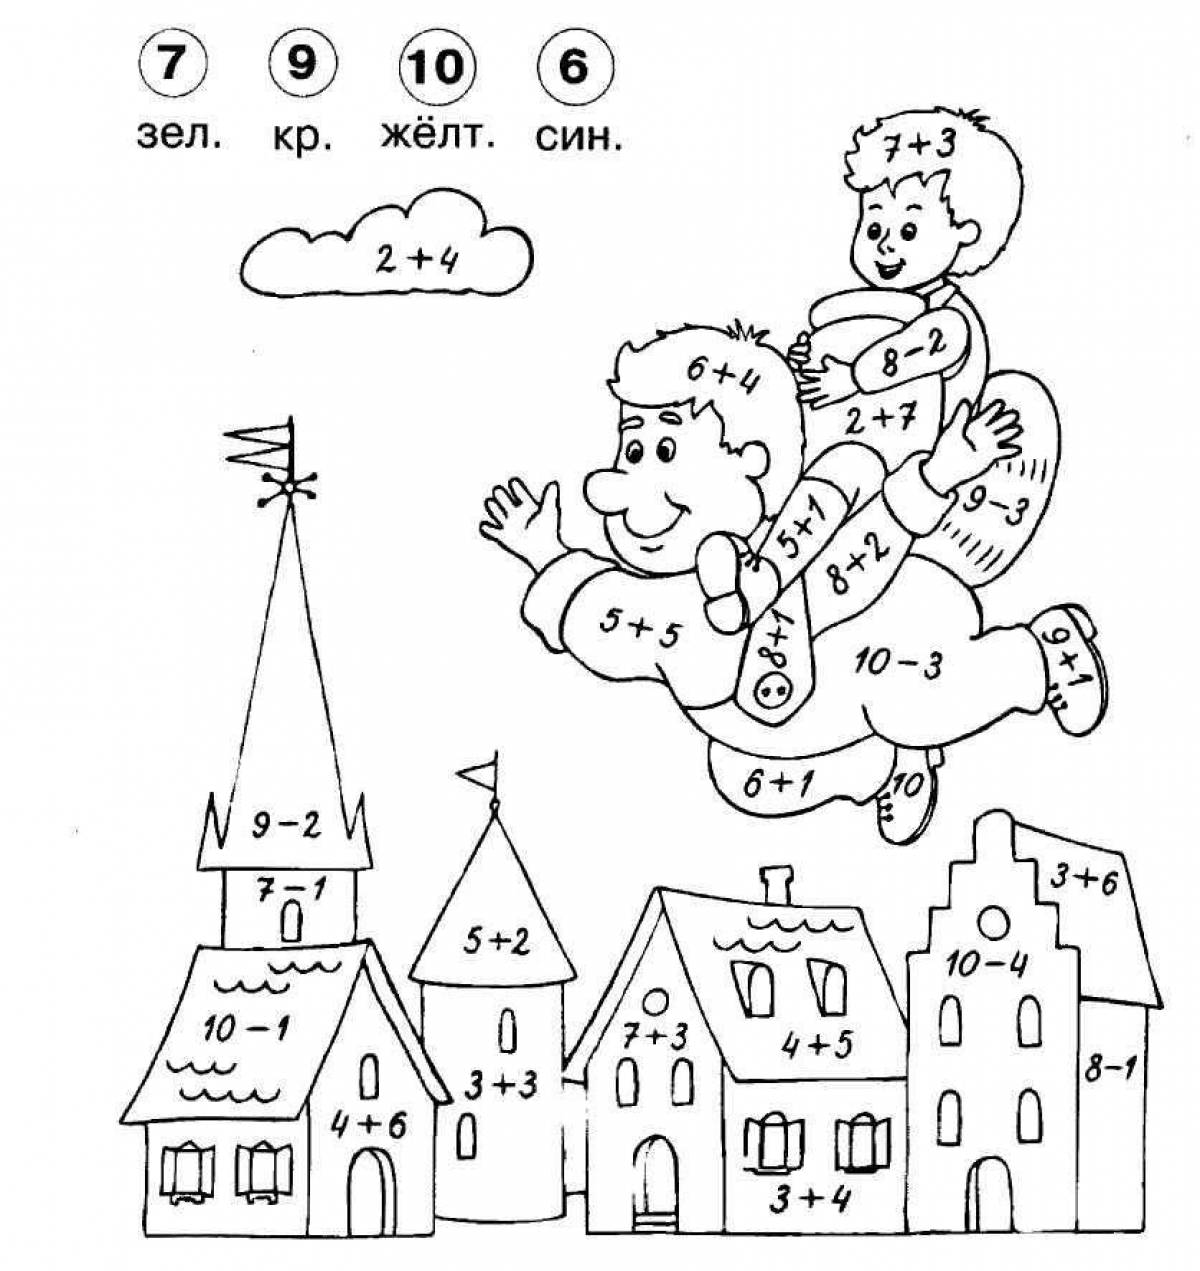 Coloring pages for grade 1 with carlson examples